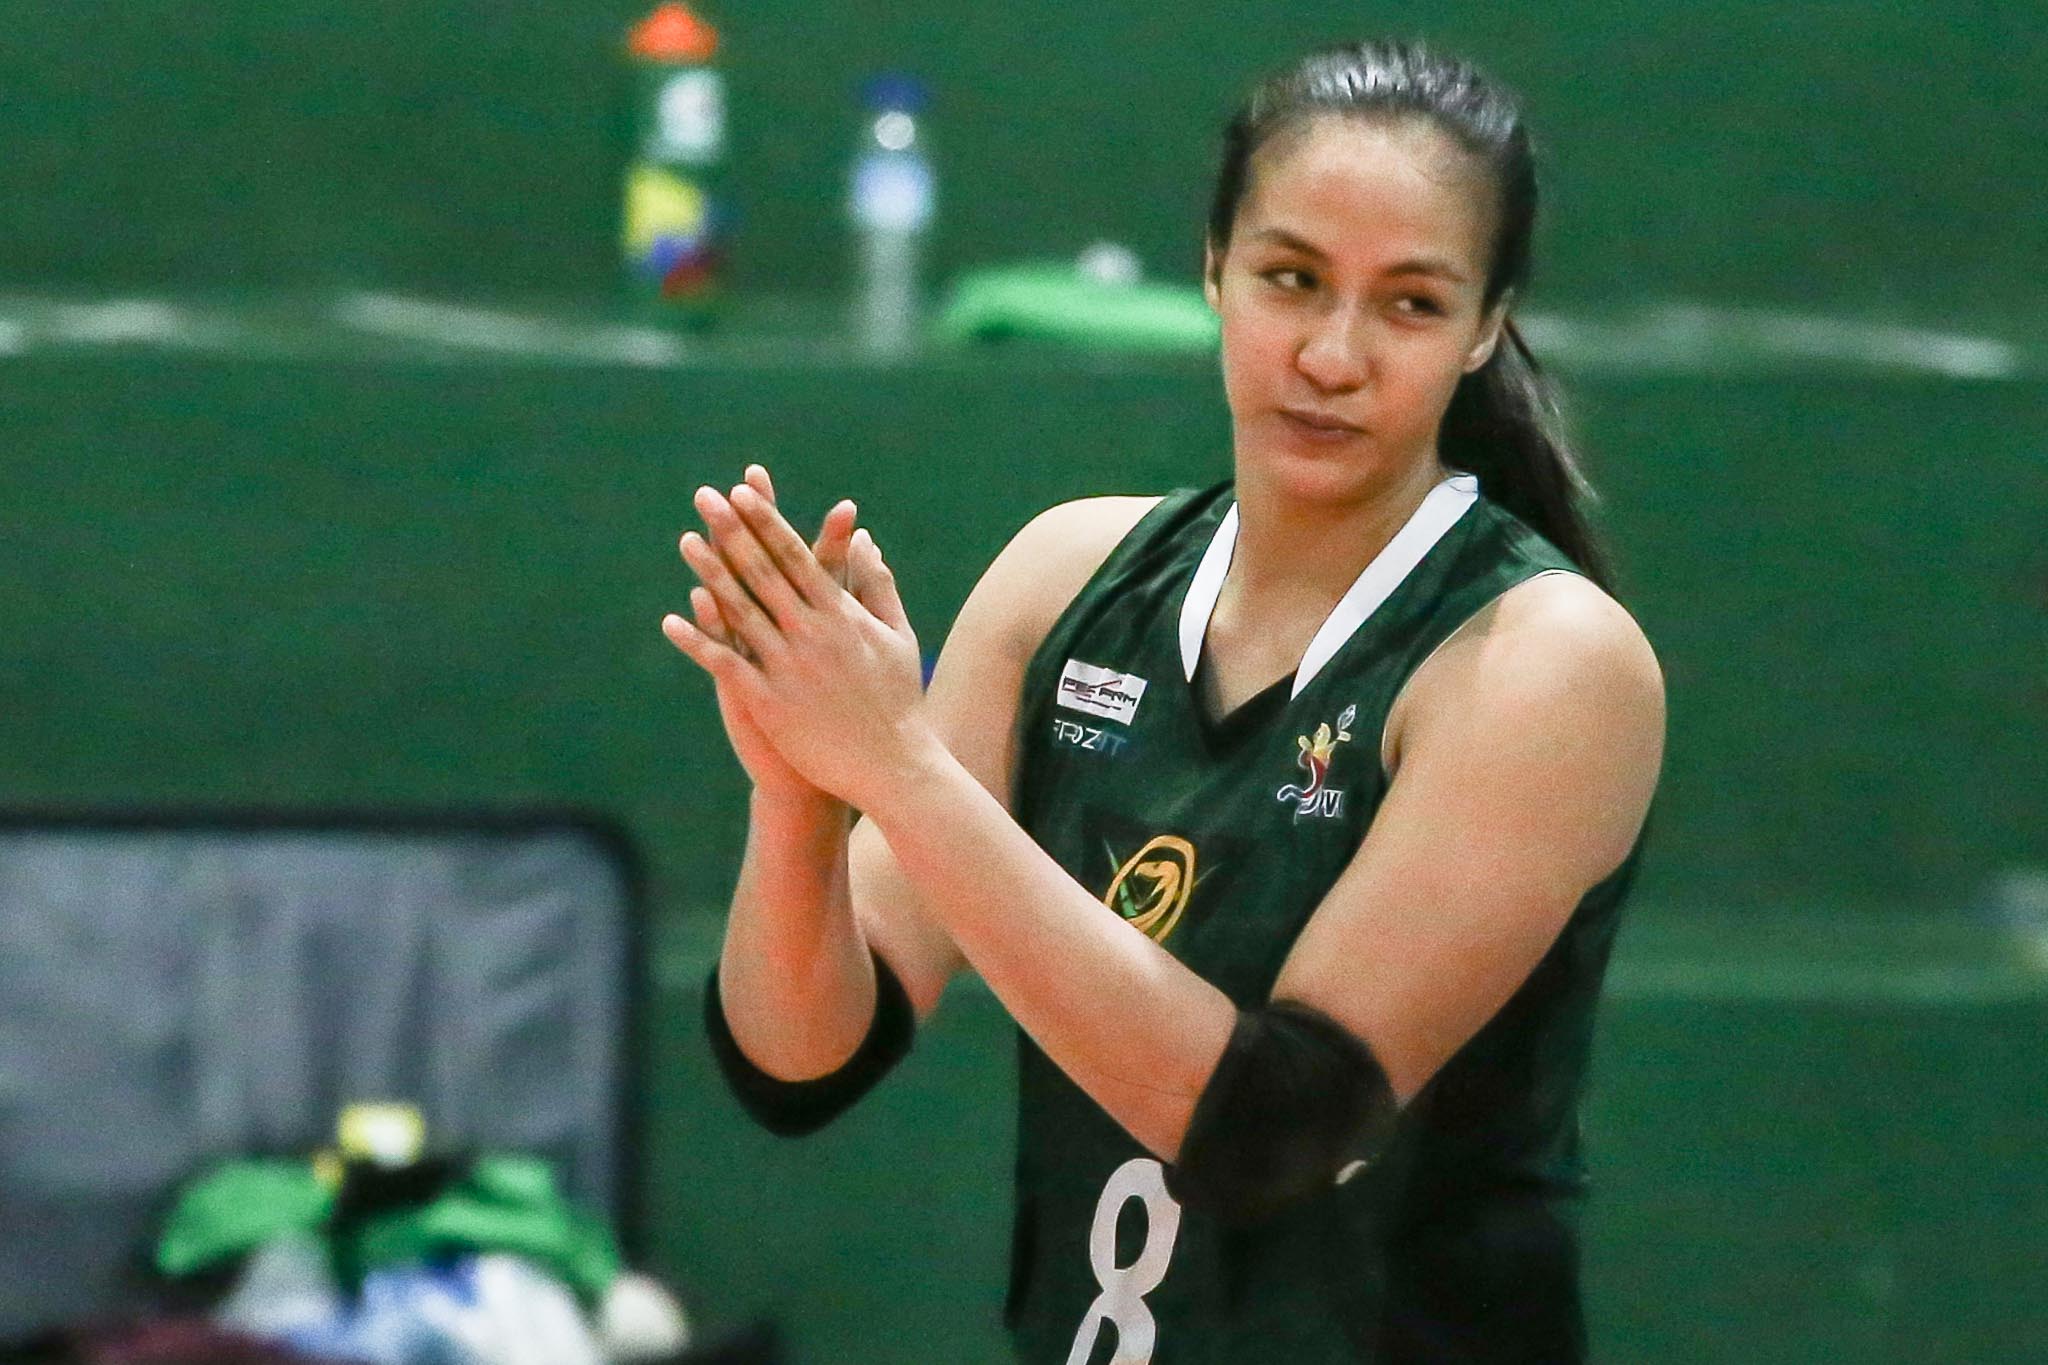 2021-PVL-Open-PLDT-vs-Army-Jovelyn-Gonzaga Army reloads with Morente, Ebuen as Gonzaga, Bautista focus on SEAG News PVL Volleyball  - philippine sports news